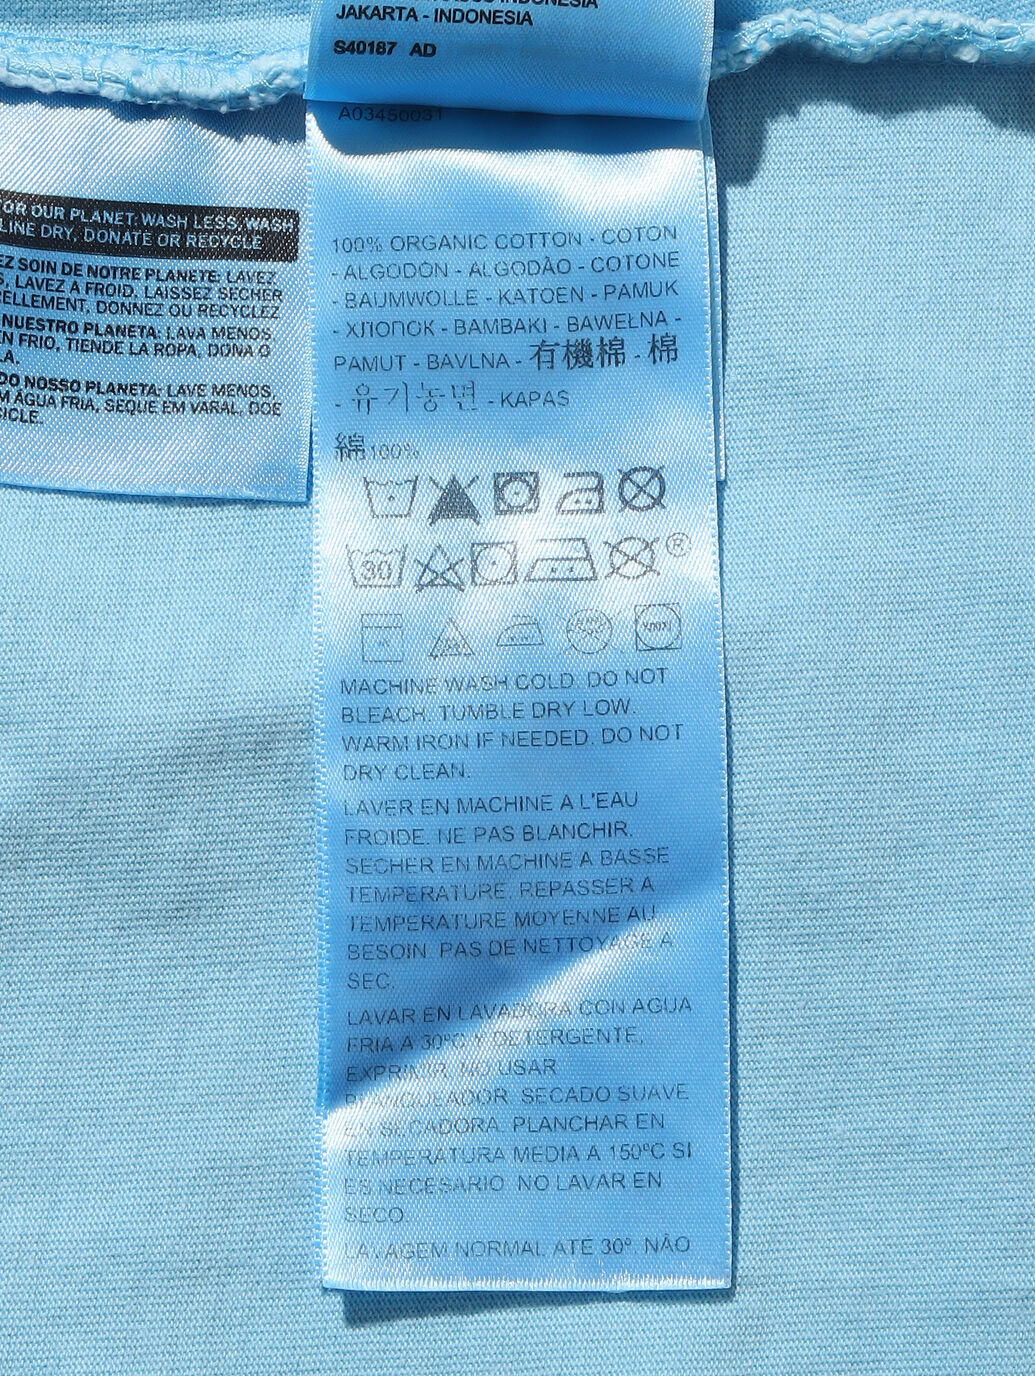 LEVI'S® FRESHGRAPHIC JET Tシャツ NATURAL GD BLUE｜リーバイス® 公式通販